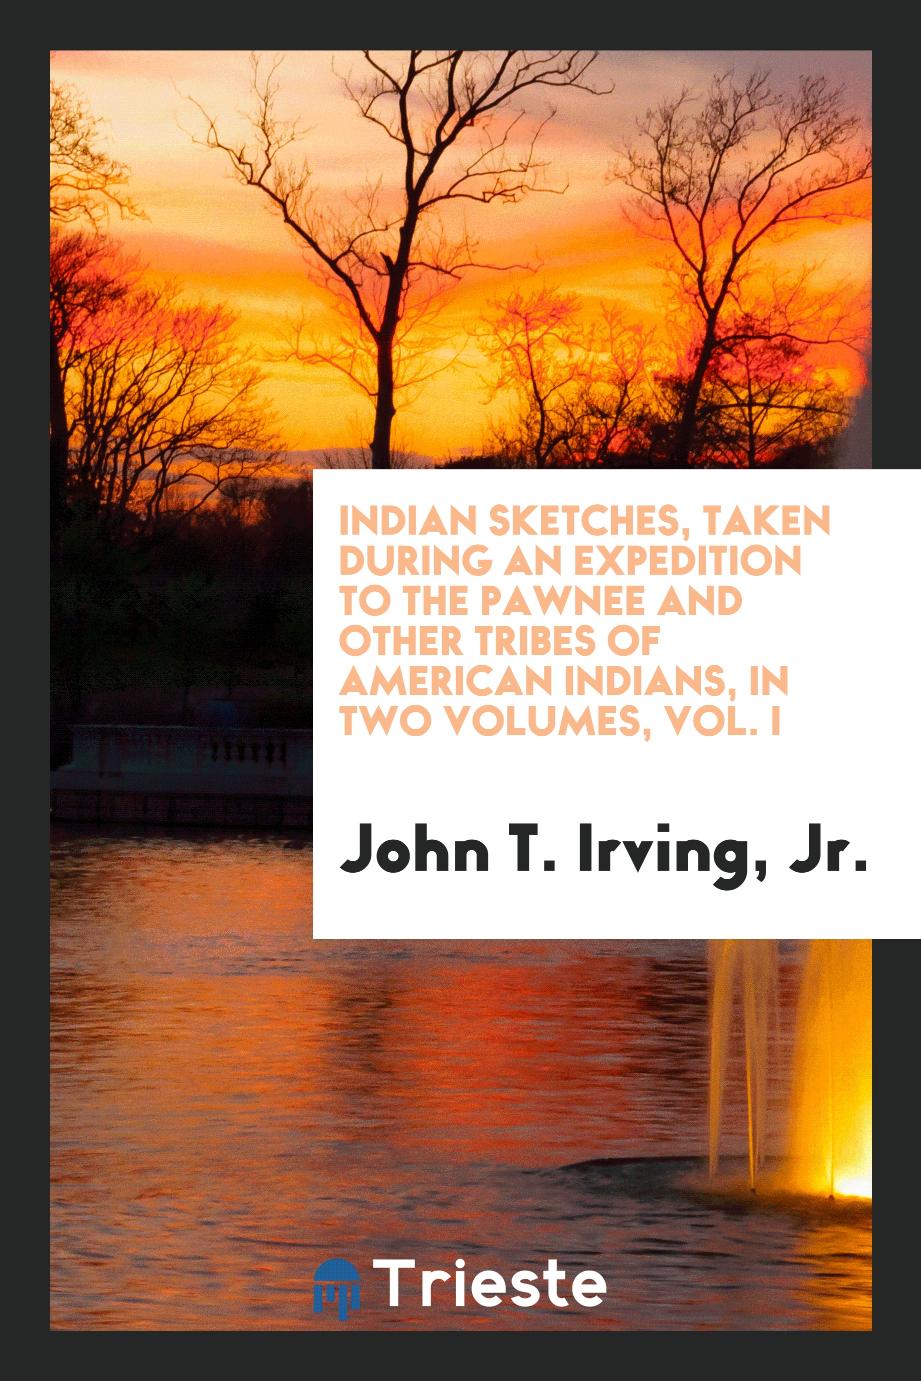 Indian Sketches, Taken During an Expedition to the Pawnee and Other Tribes of American Indians, in Two Volumes, Vol. I